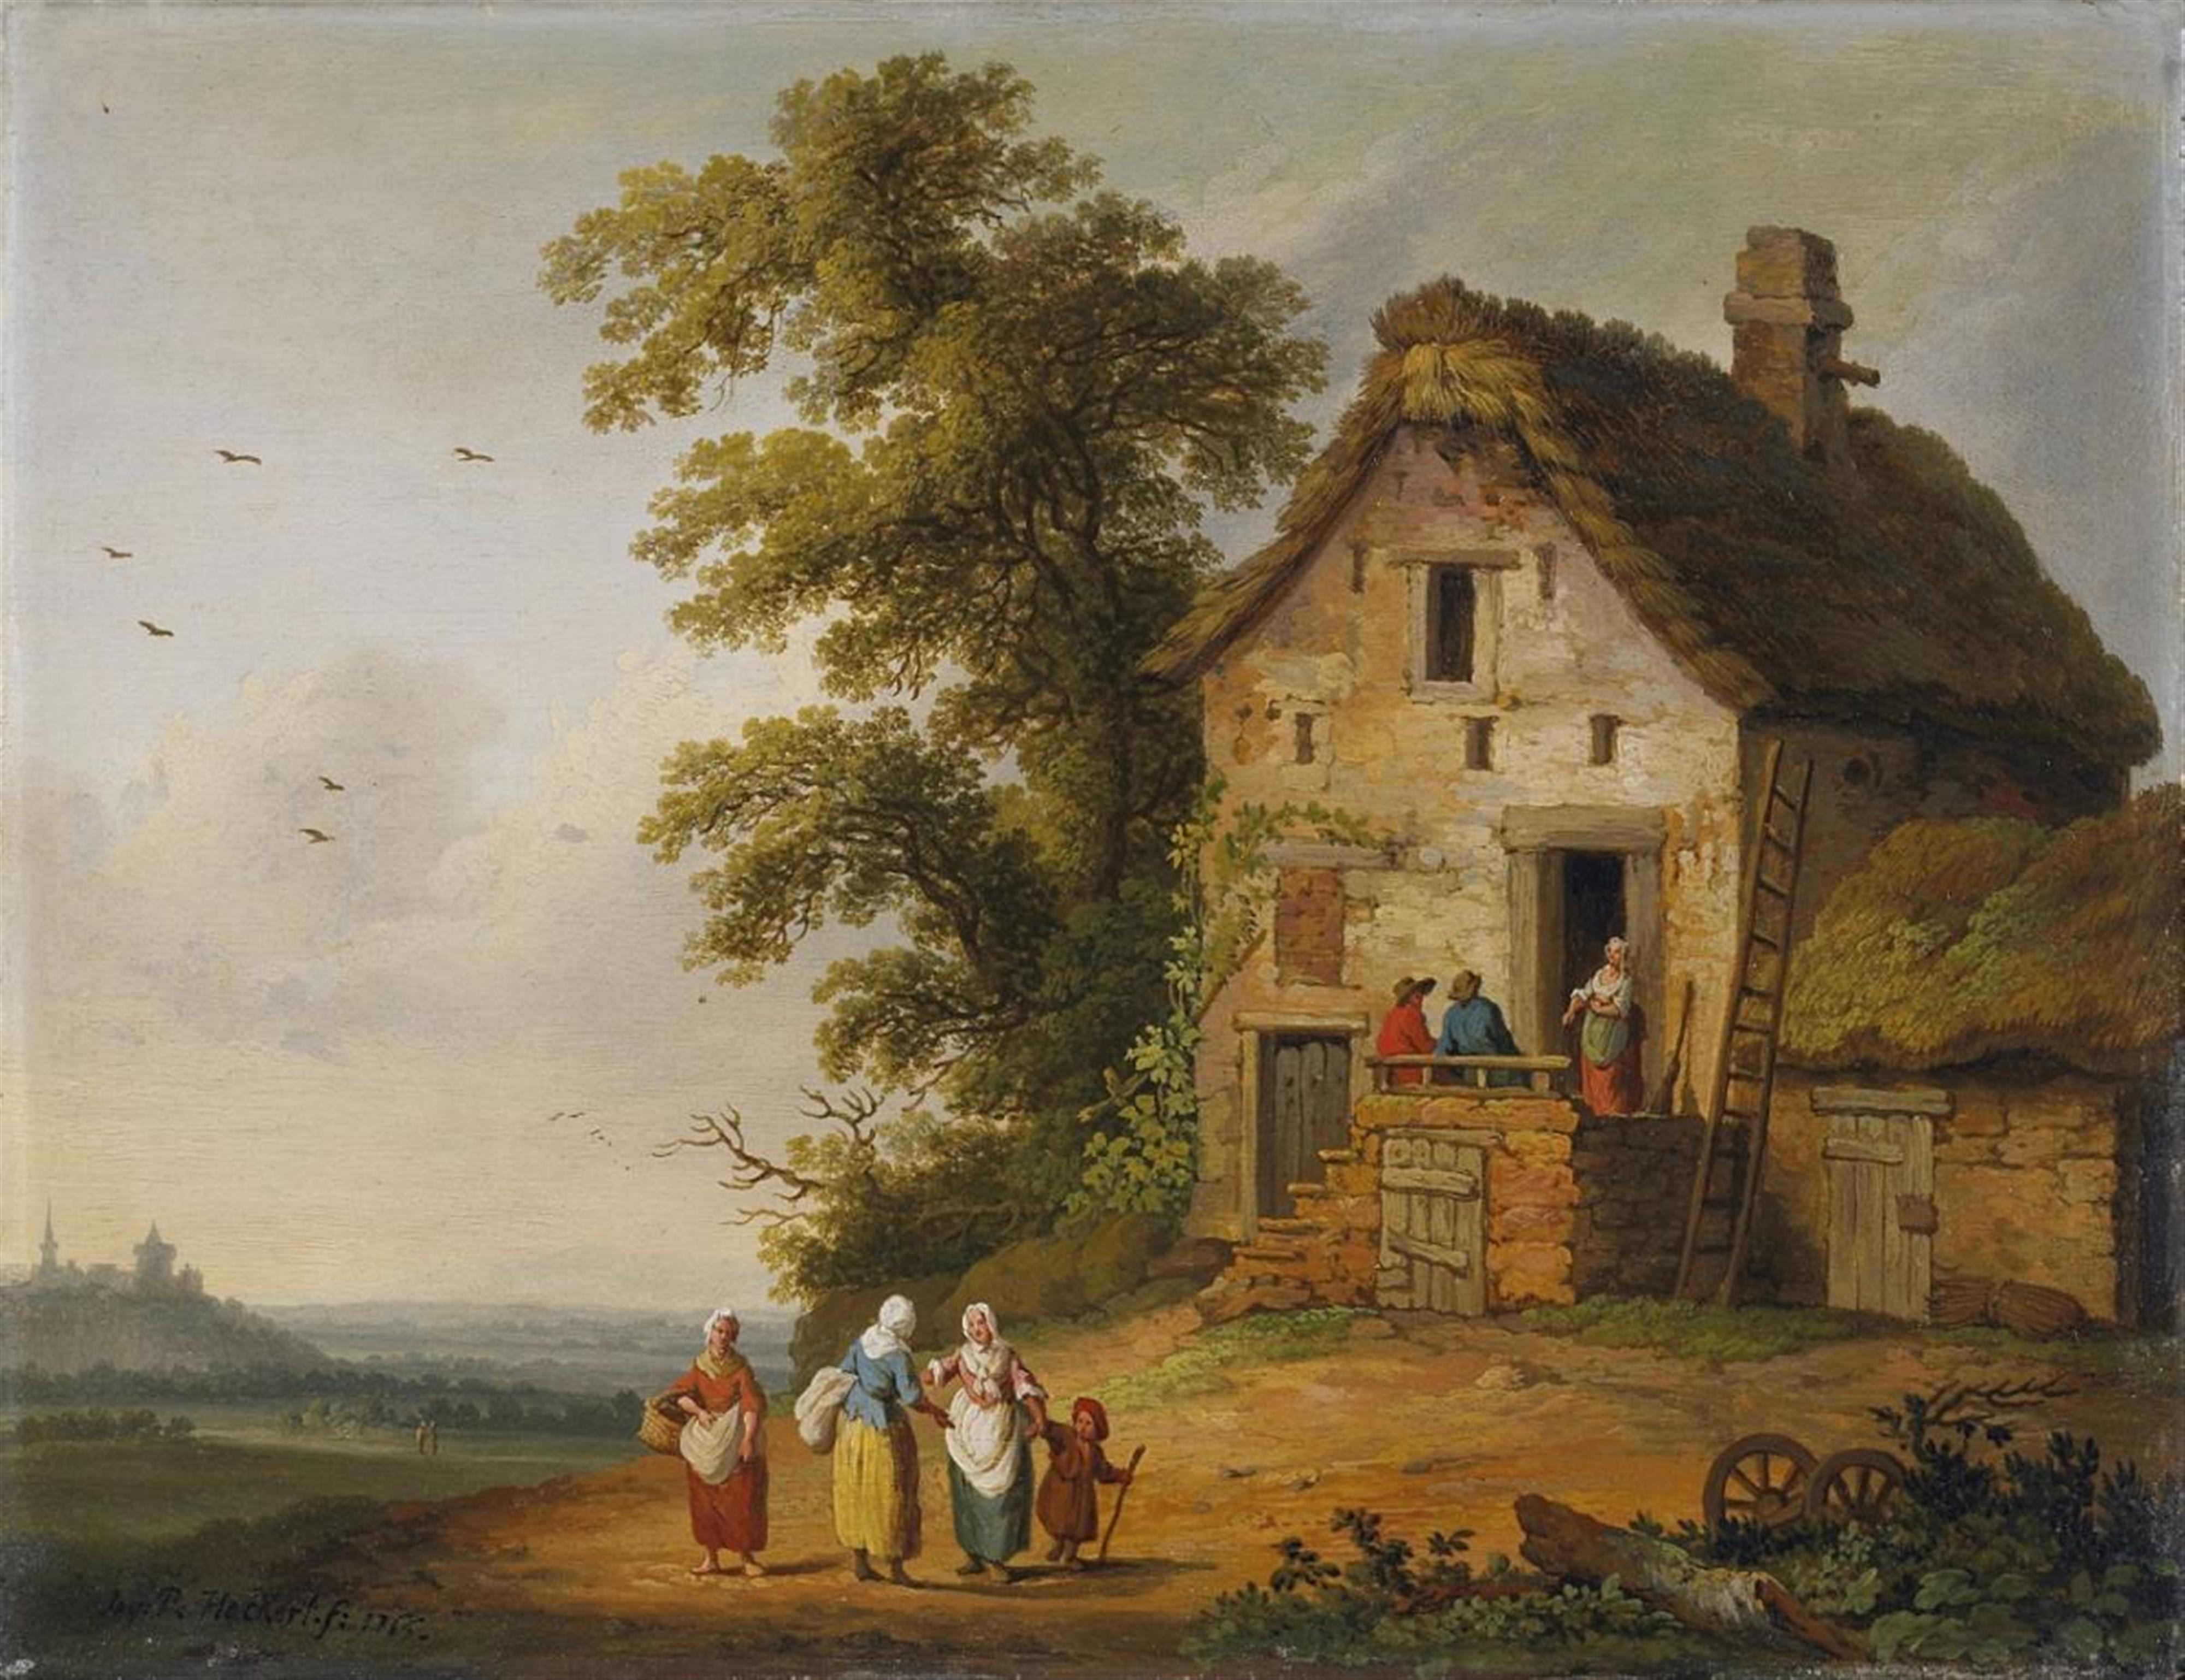 Jacob Philipp Hackert - TWO LANDSCAPES WITH FARMSTEADS - image-1